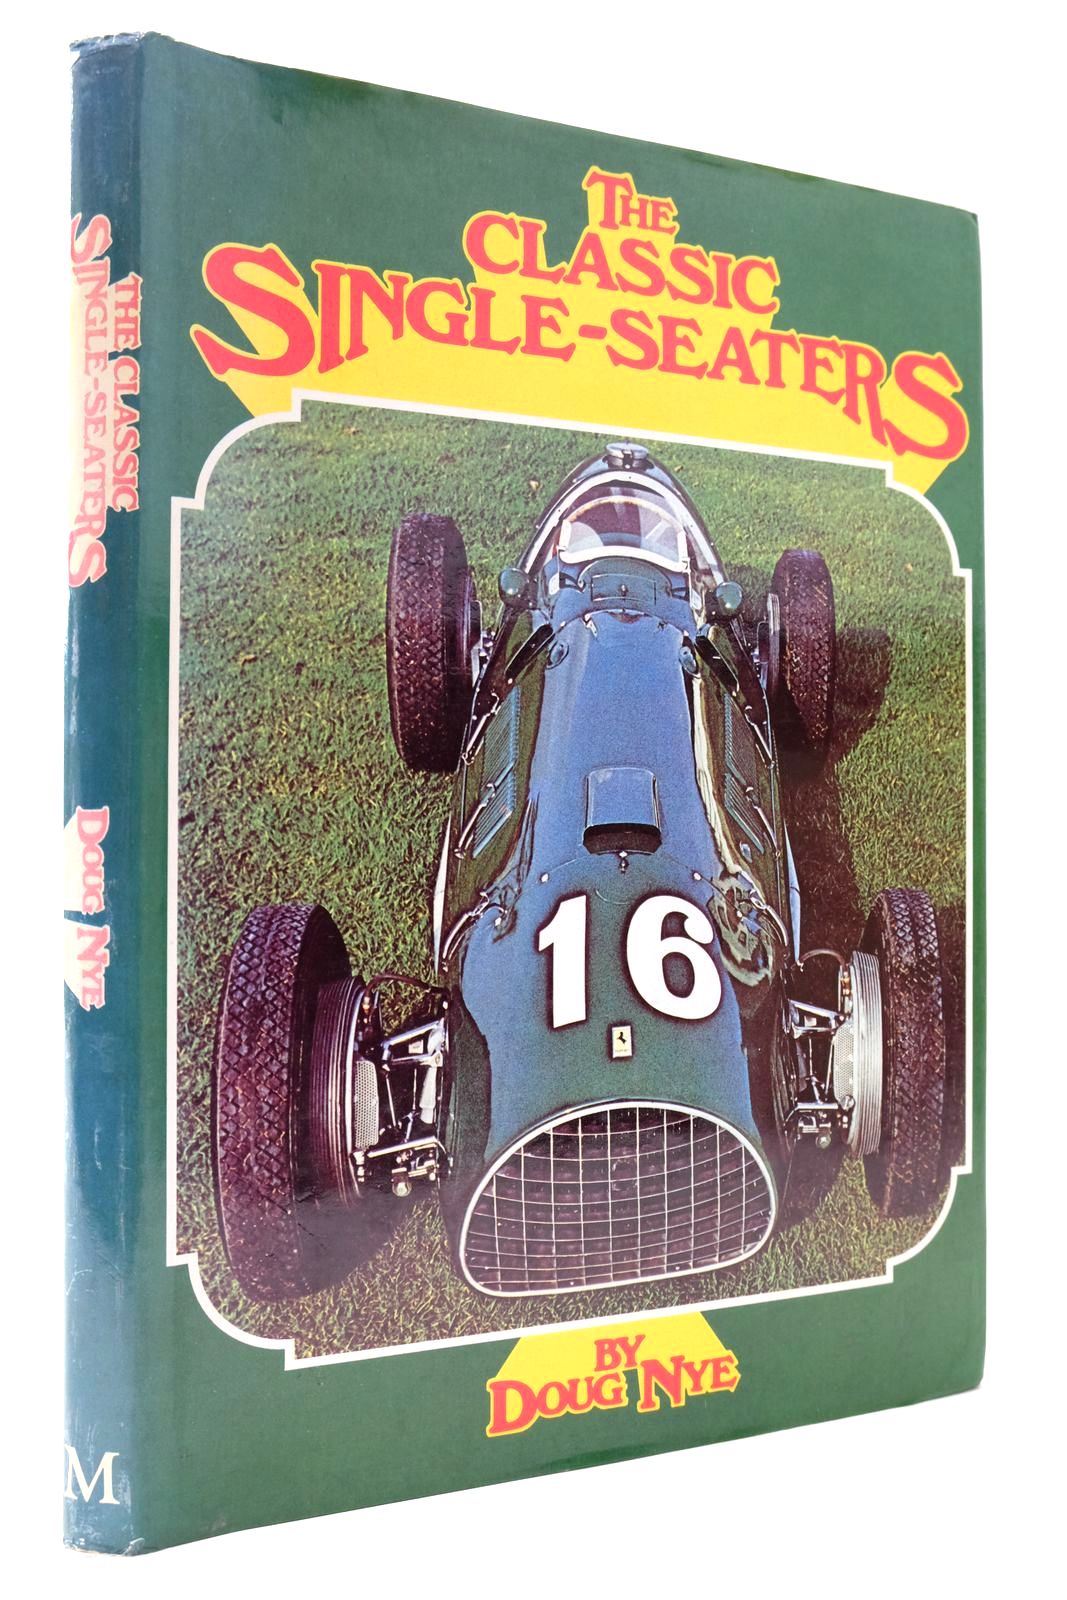 Photo of THE CLASSIC SINGLE-SEATERS GREAT RACING CARS OF THE DONINGTON COLLECTION written by Nye, Doug Goddard, Geoffrey published by MacMillan (STOCK CODE: 2133461)  for sale by Stella & Rose's Books